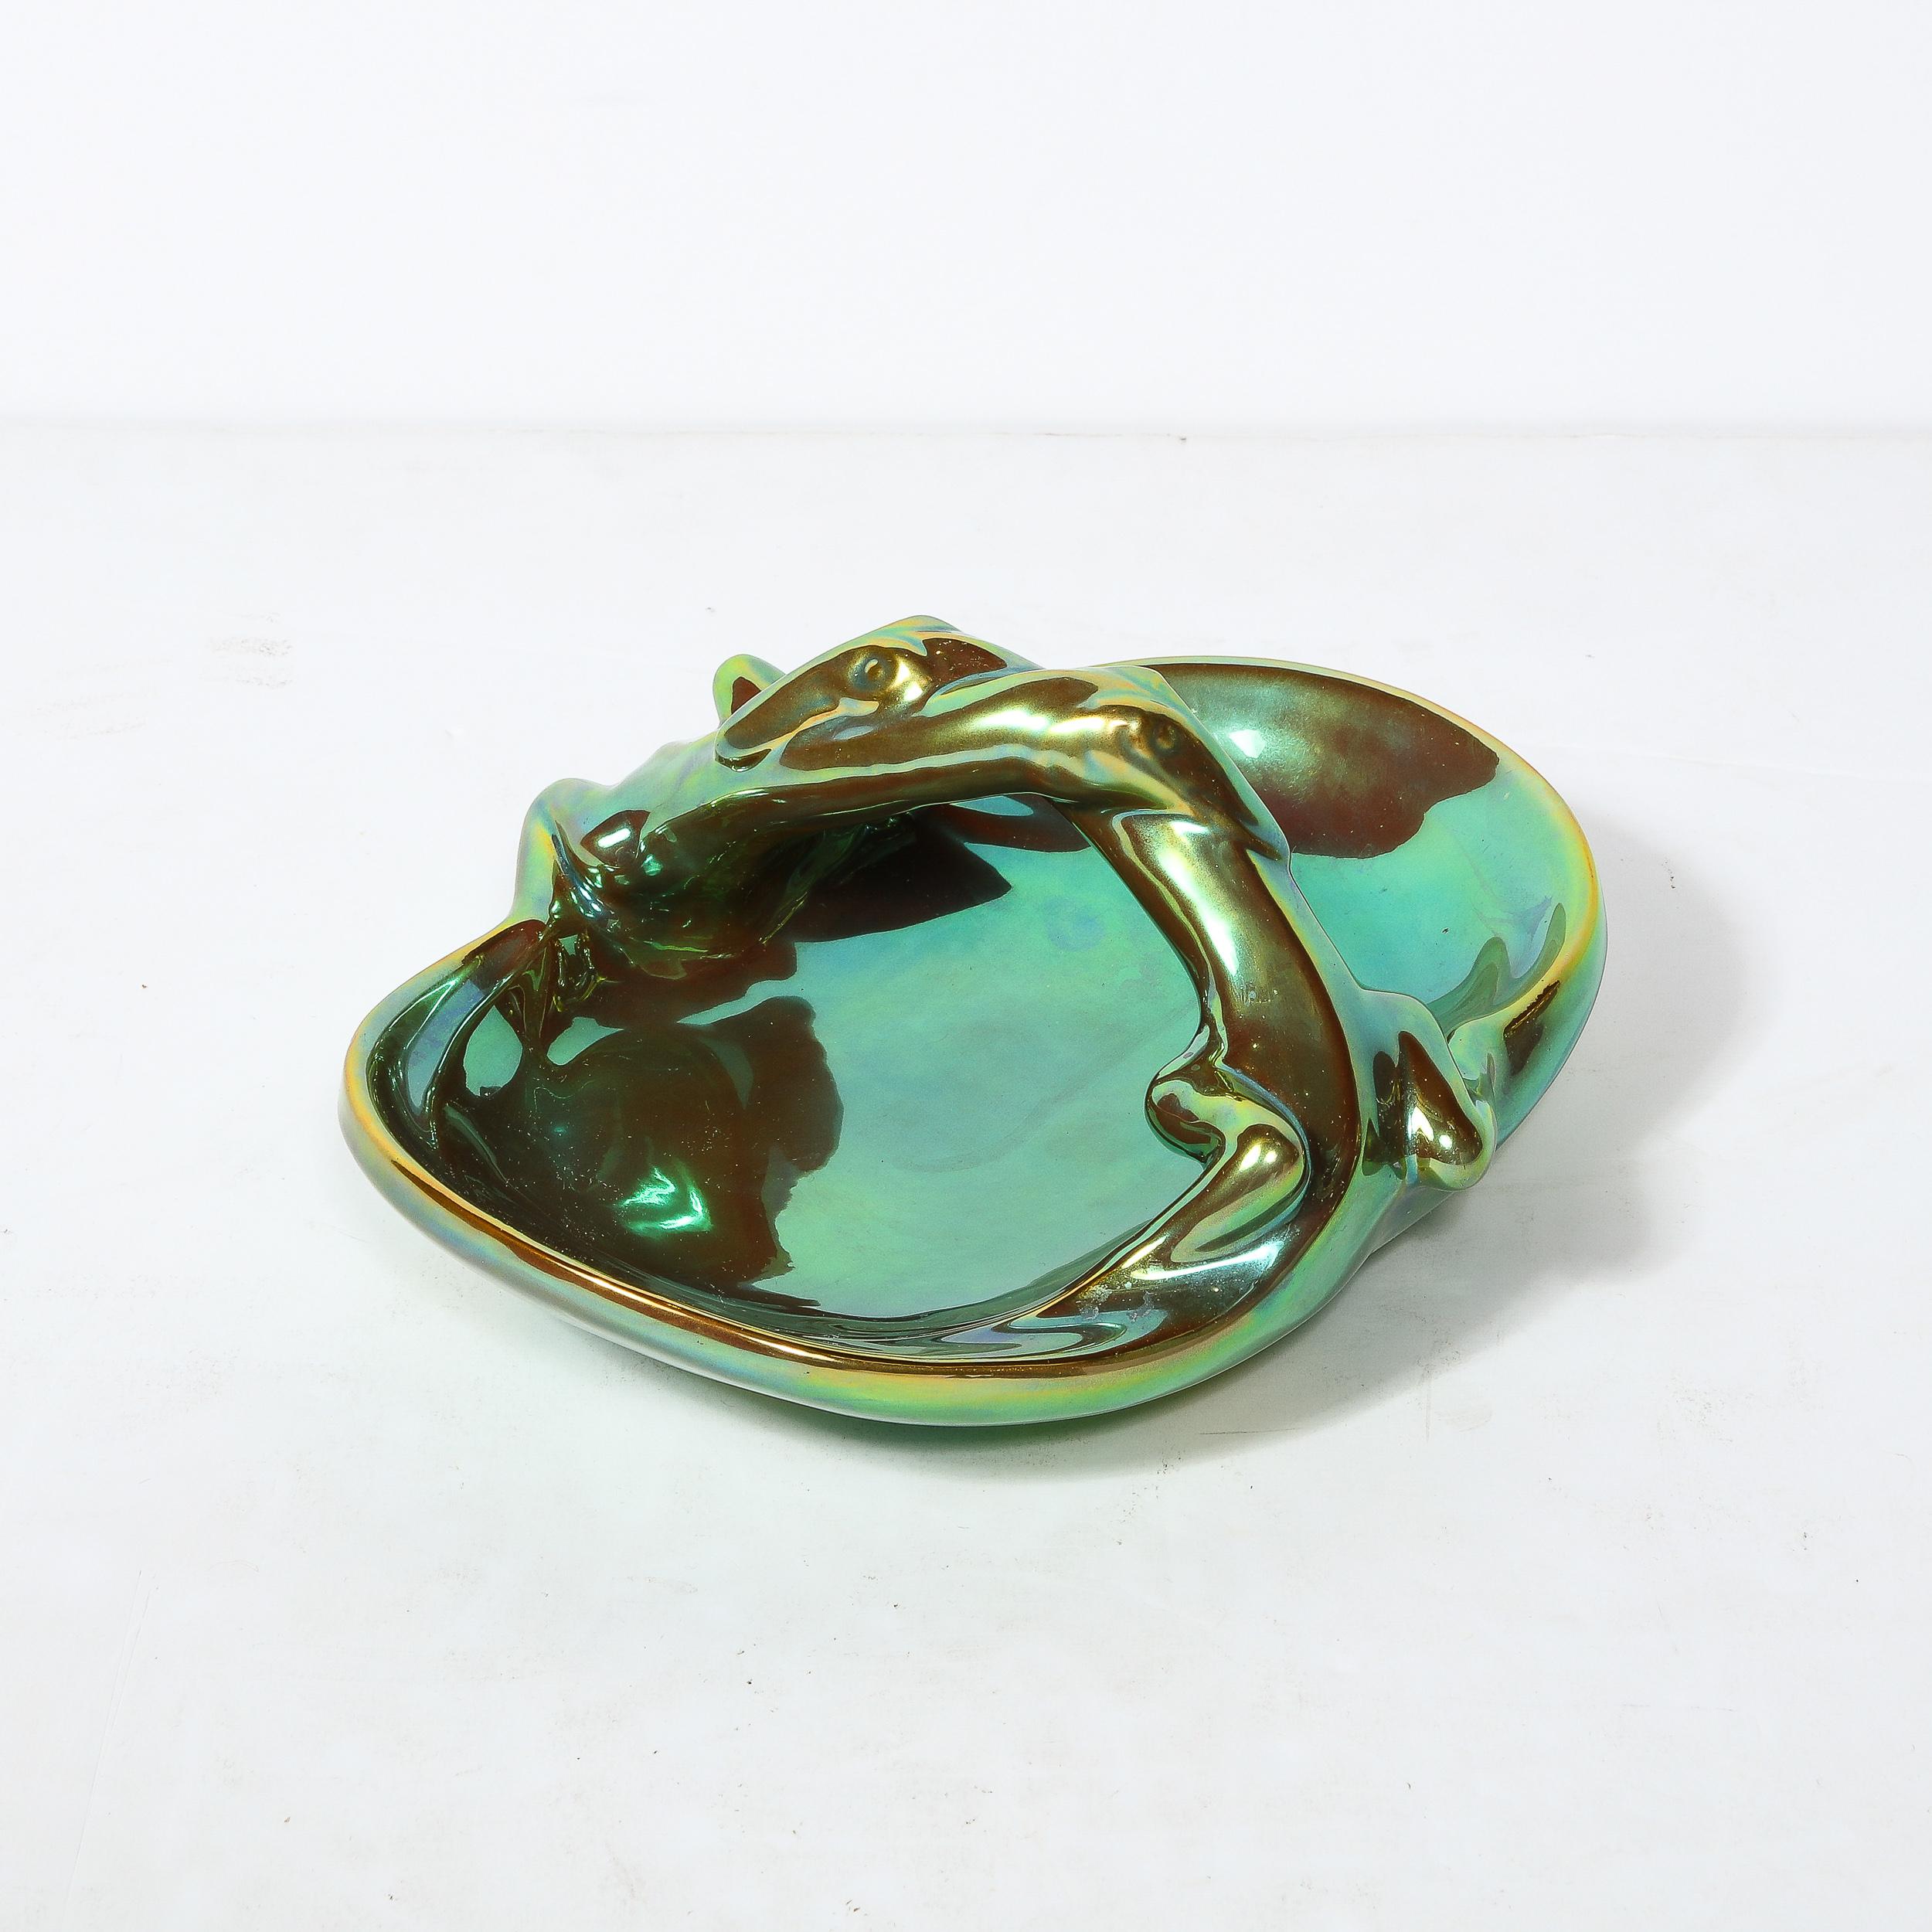 Art Deco Basket Form Ceramic Dish of Entwined Lizards by Zsolnay Eosin For Sale 1